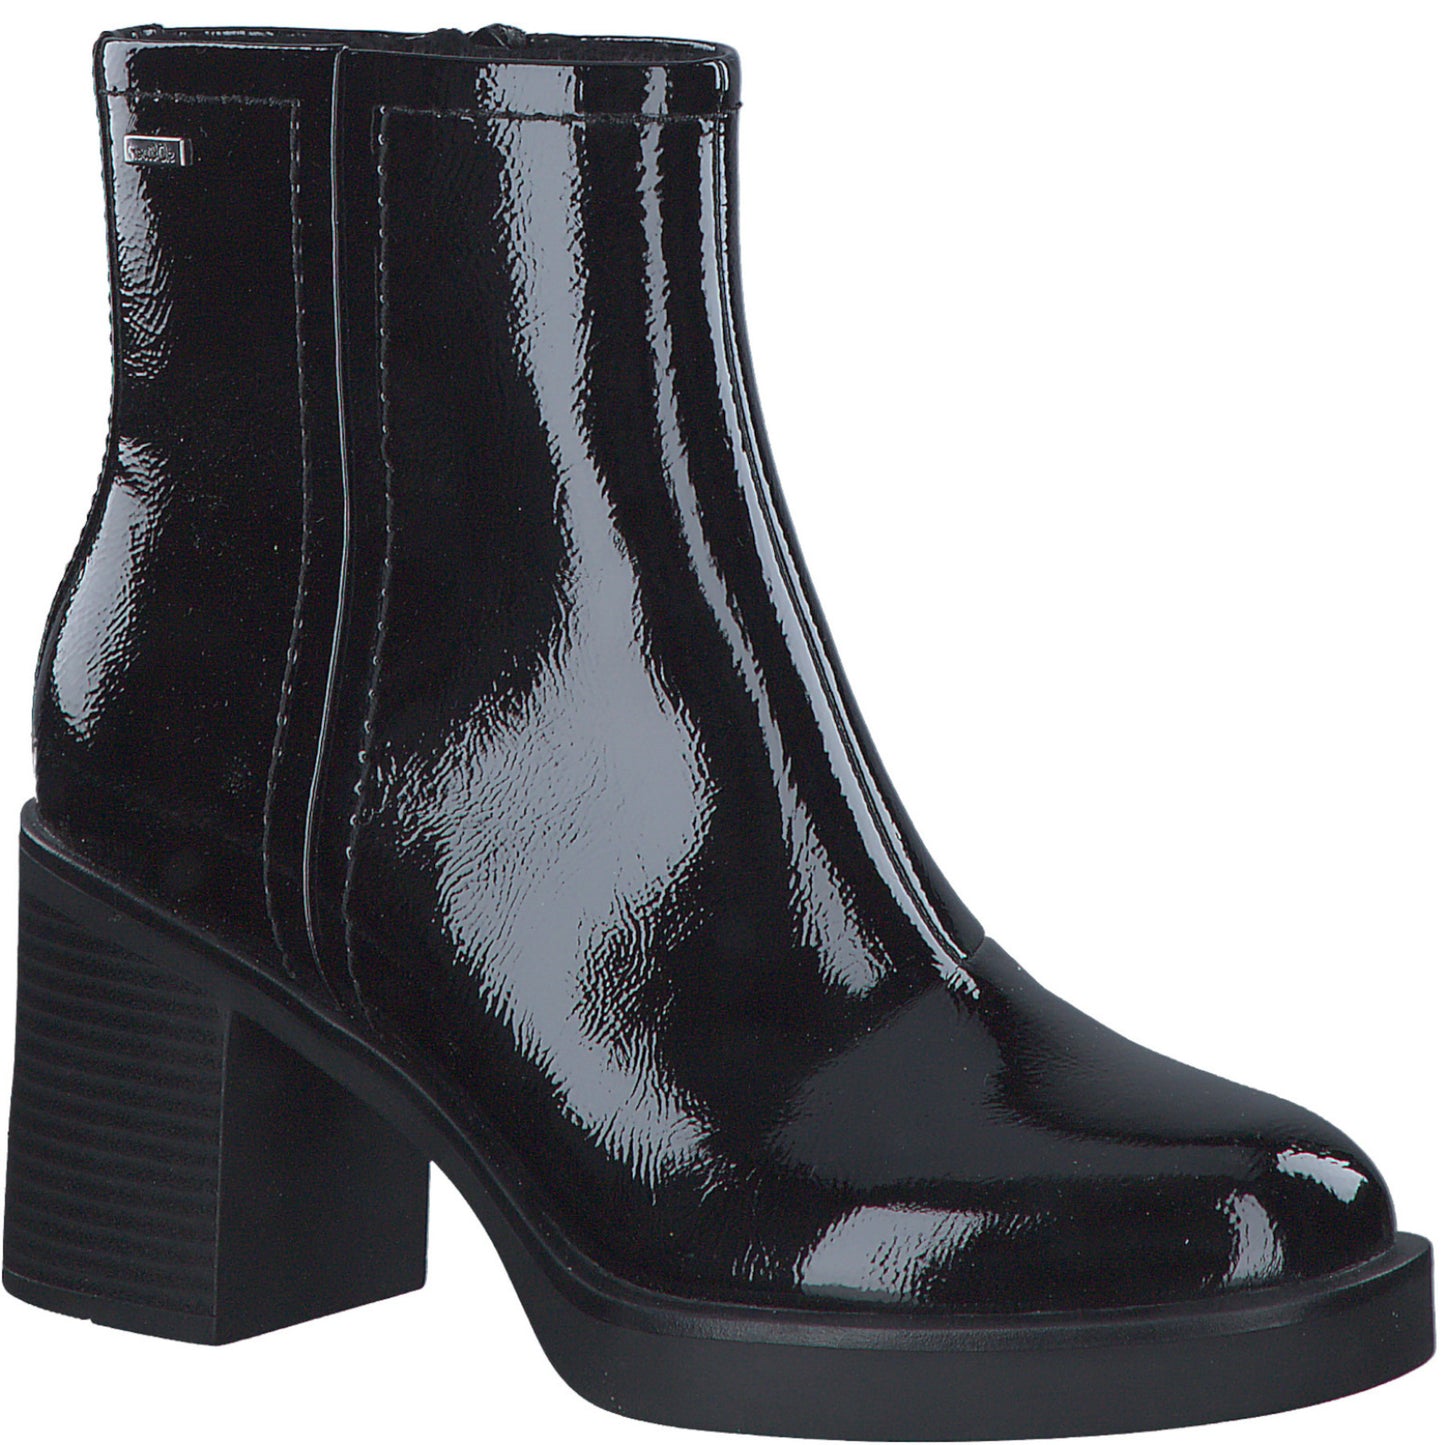 S Oliver 5-25324-41 018 Black Patent Boots